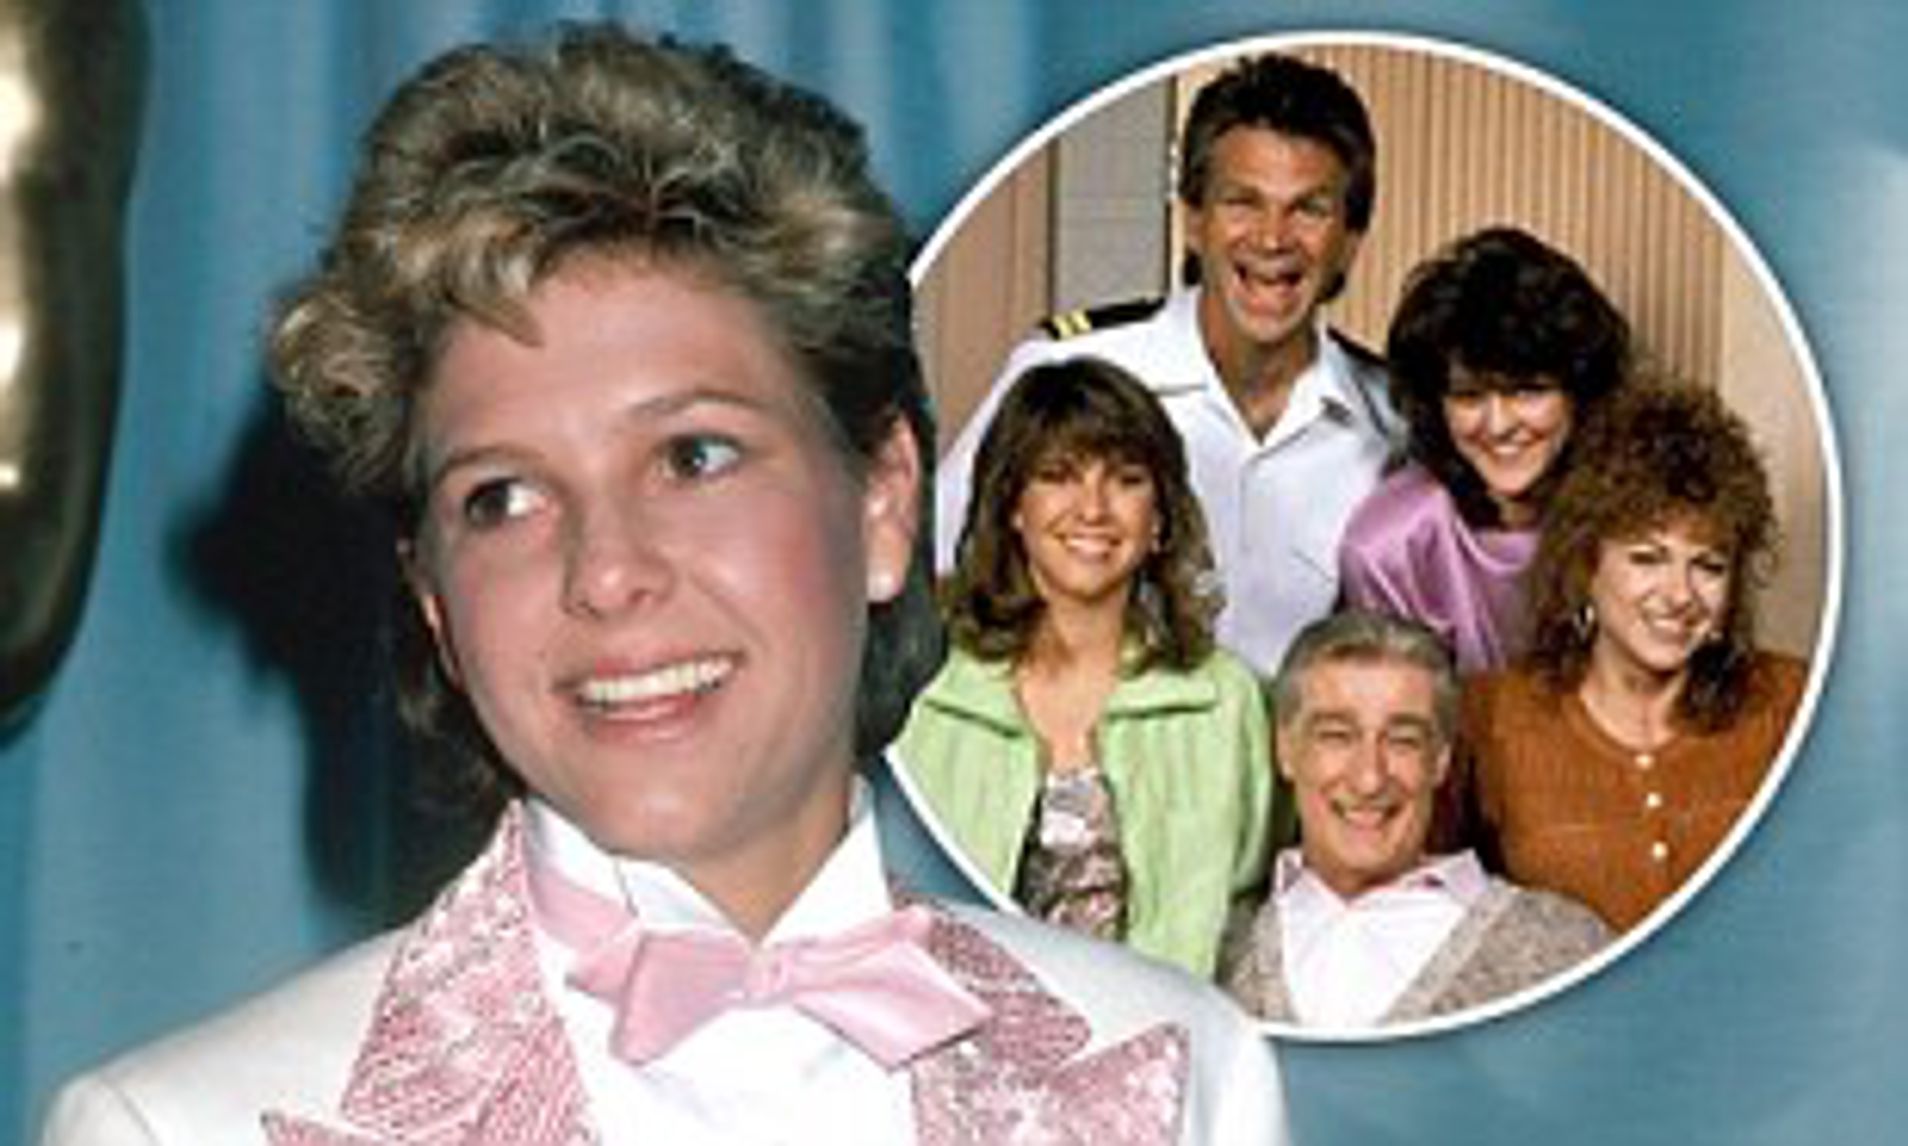 Collage of two photos: a portrait of a woman with a short hairstyle and bowtie in the foreground, and a group photo in the inset featuring four individuals smiling, suggesting a snapshot from a television show or a personal album.